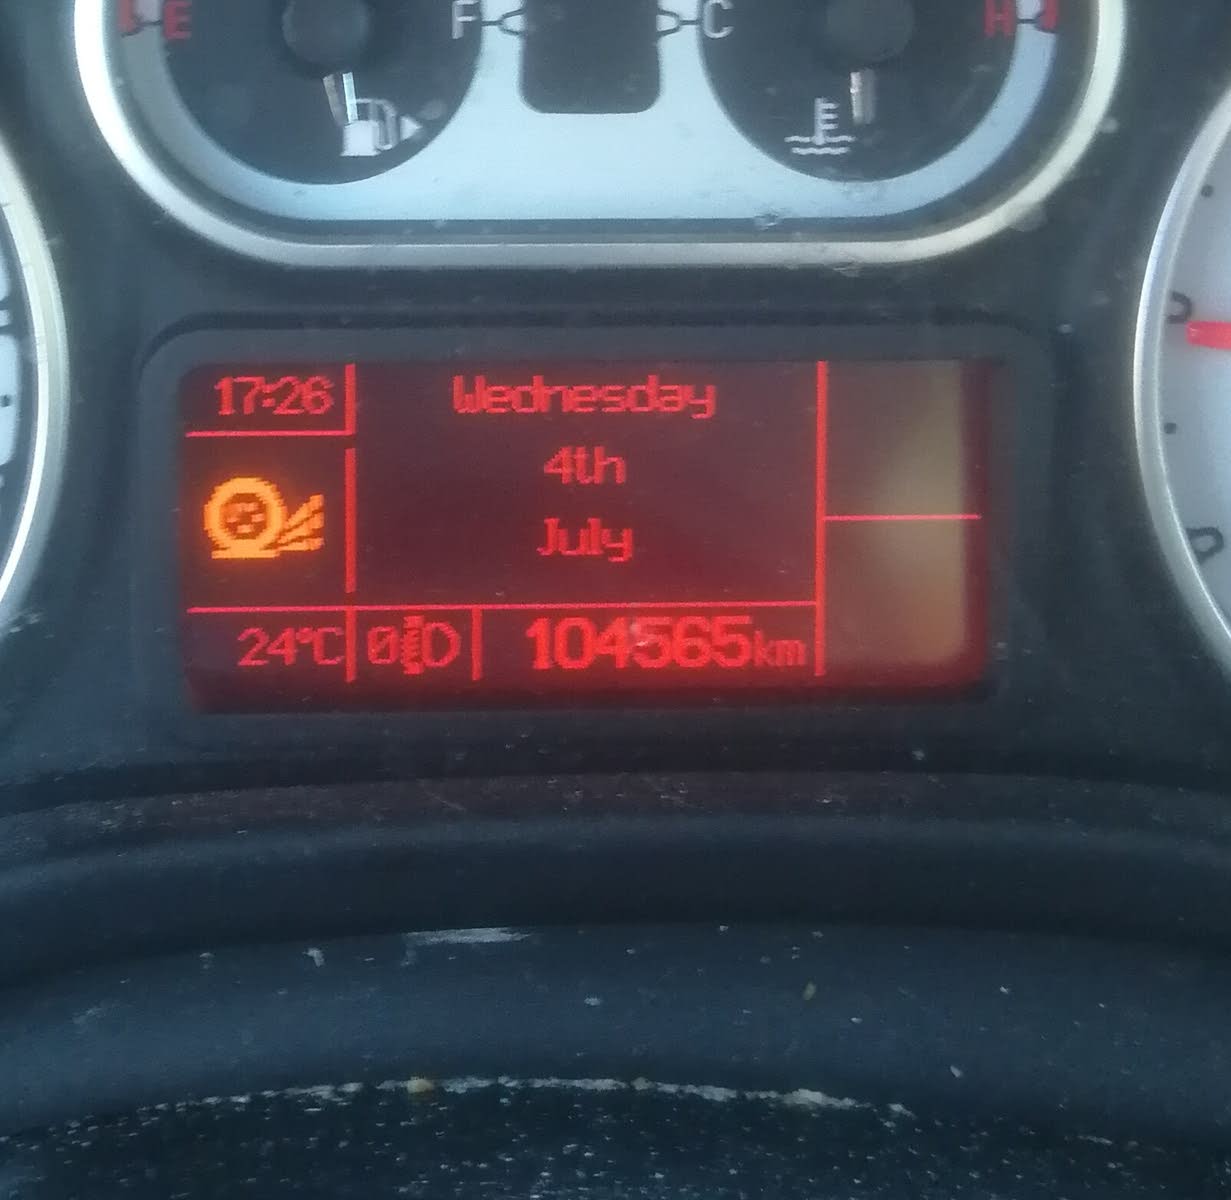 FIAT 500L Questions - Warning light.. What it mean? - CarGurus